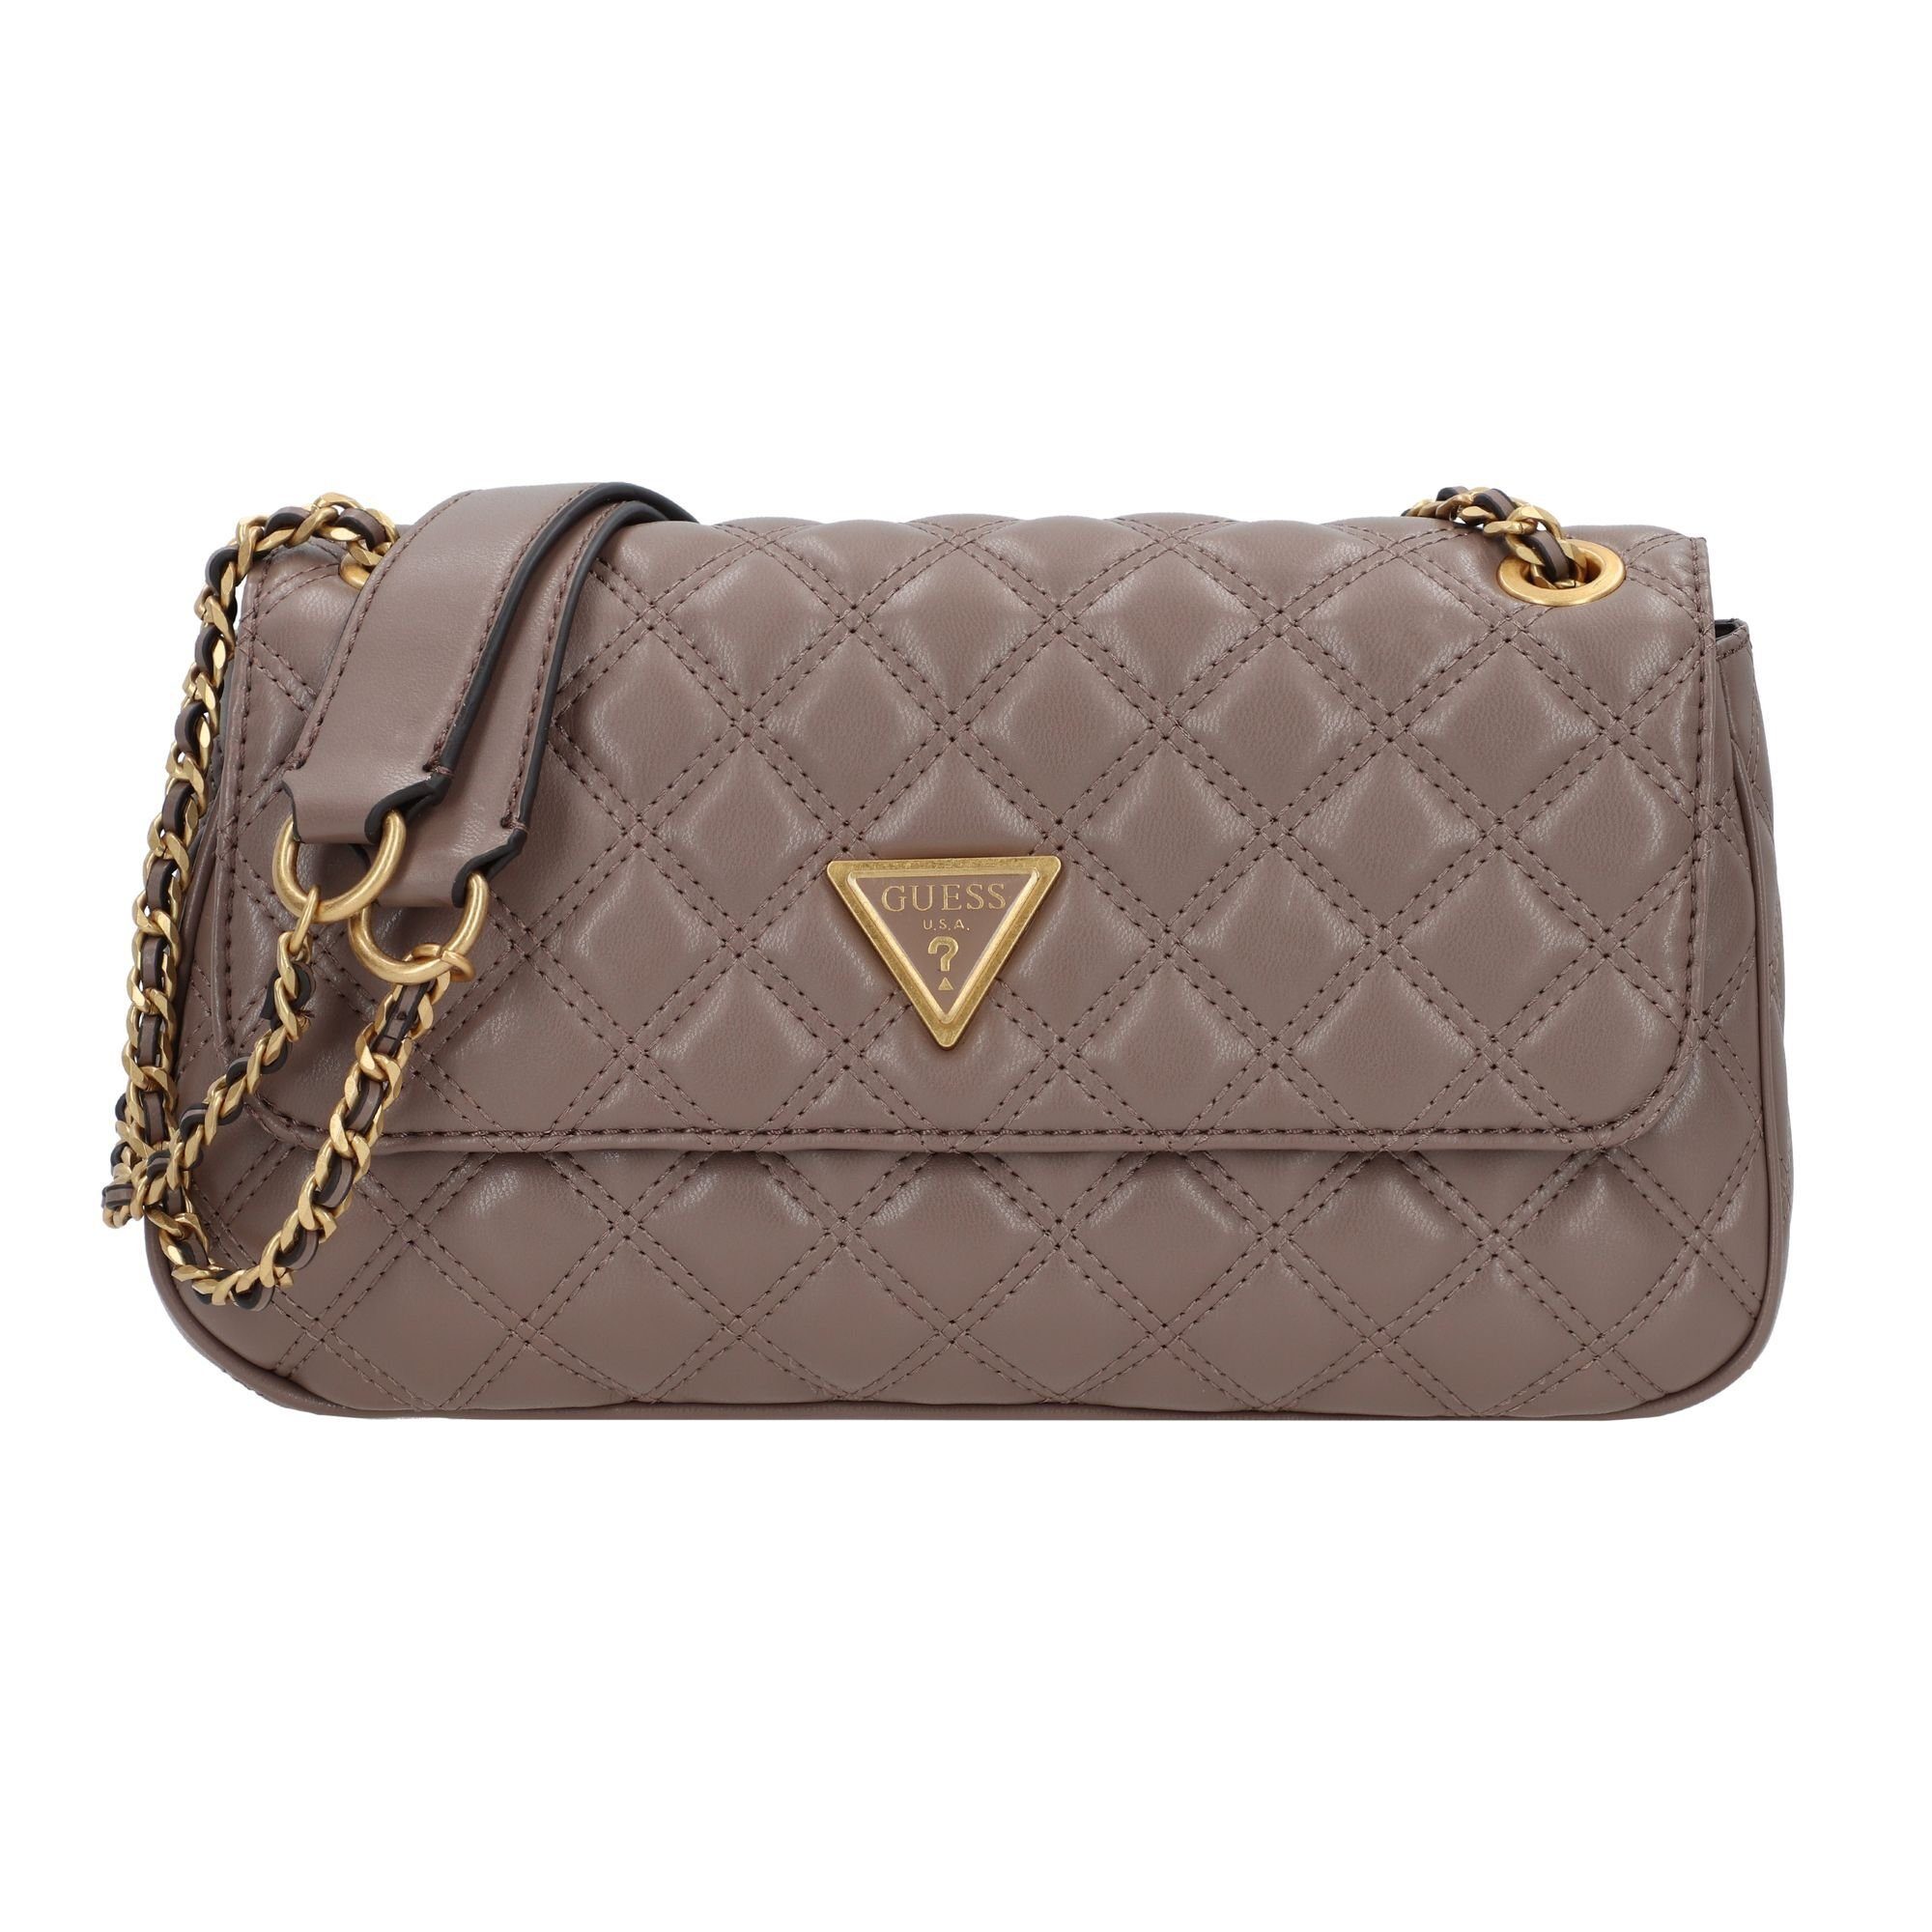 Polyurethan Giully, taupe dark Guess Schultertasche